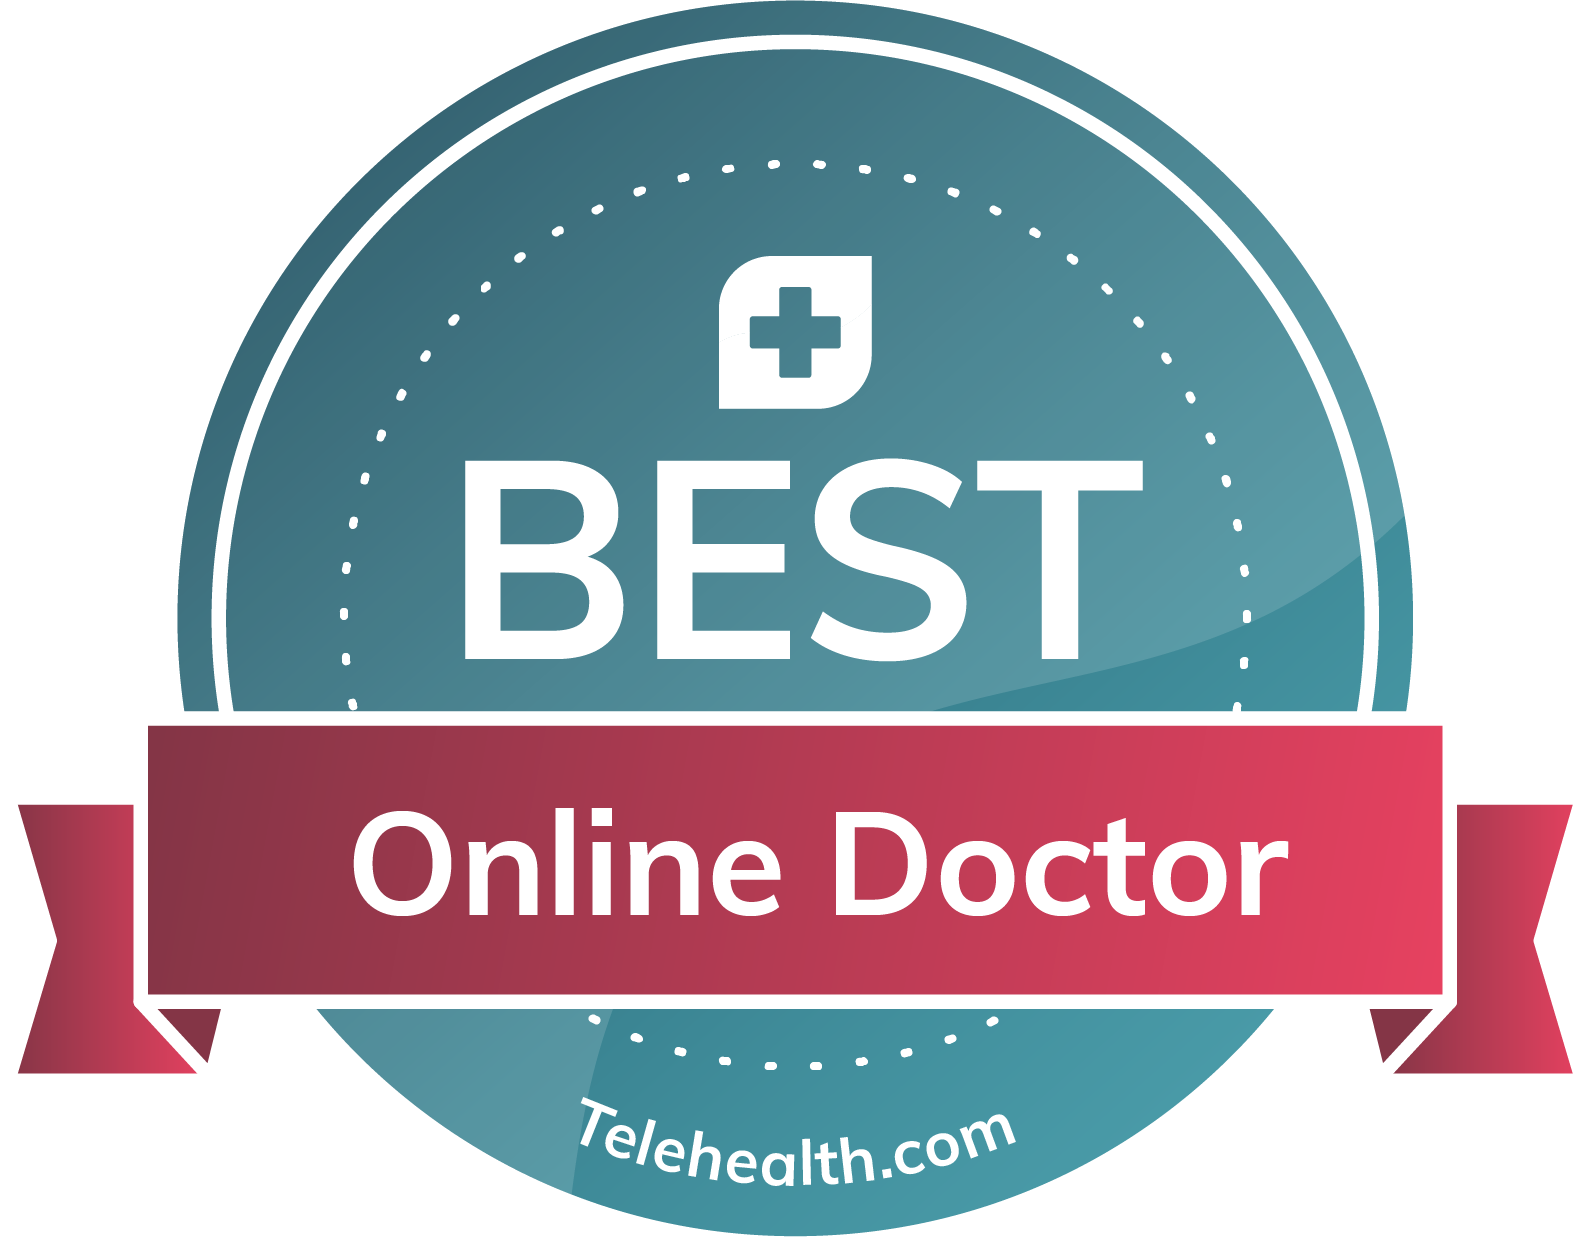 Online Doctor Video-Consult 24/7, 3 Hour Delivery